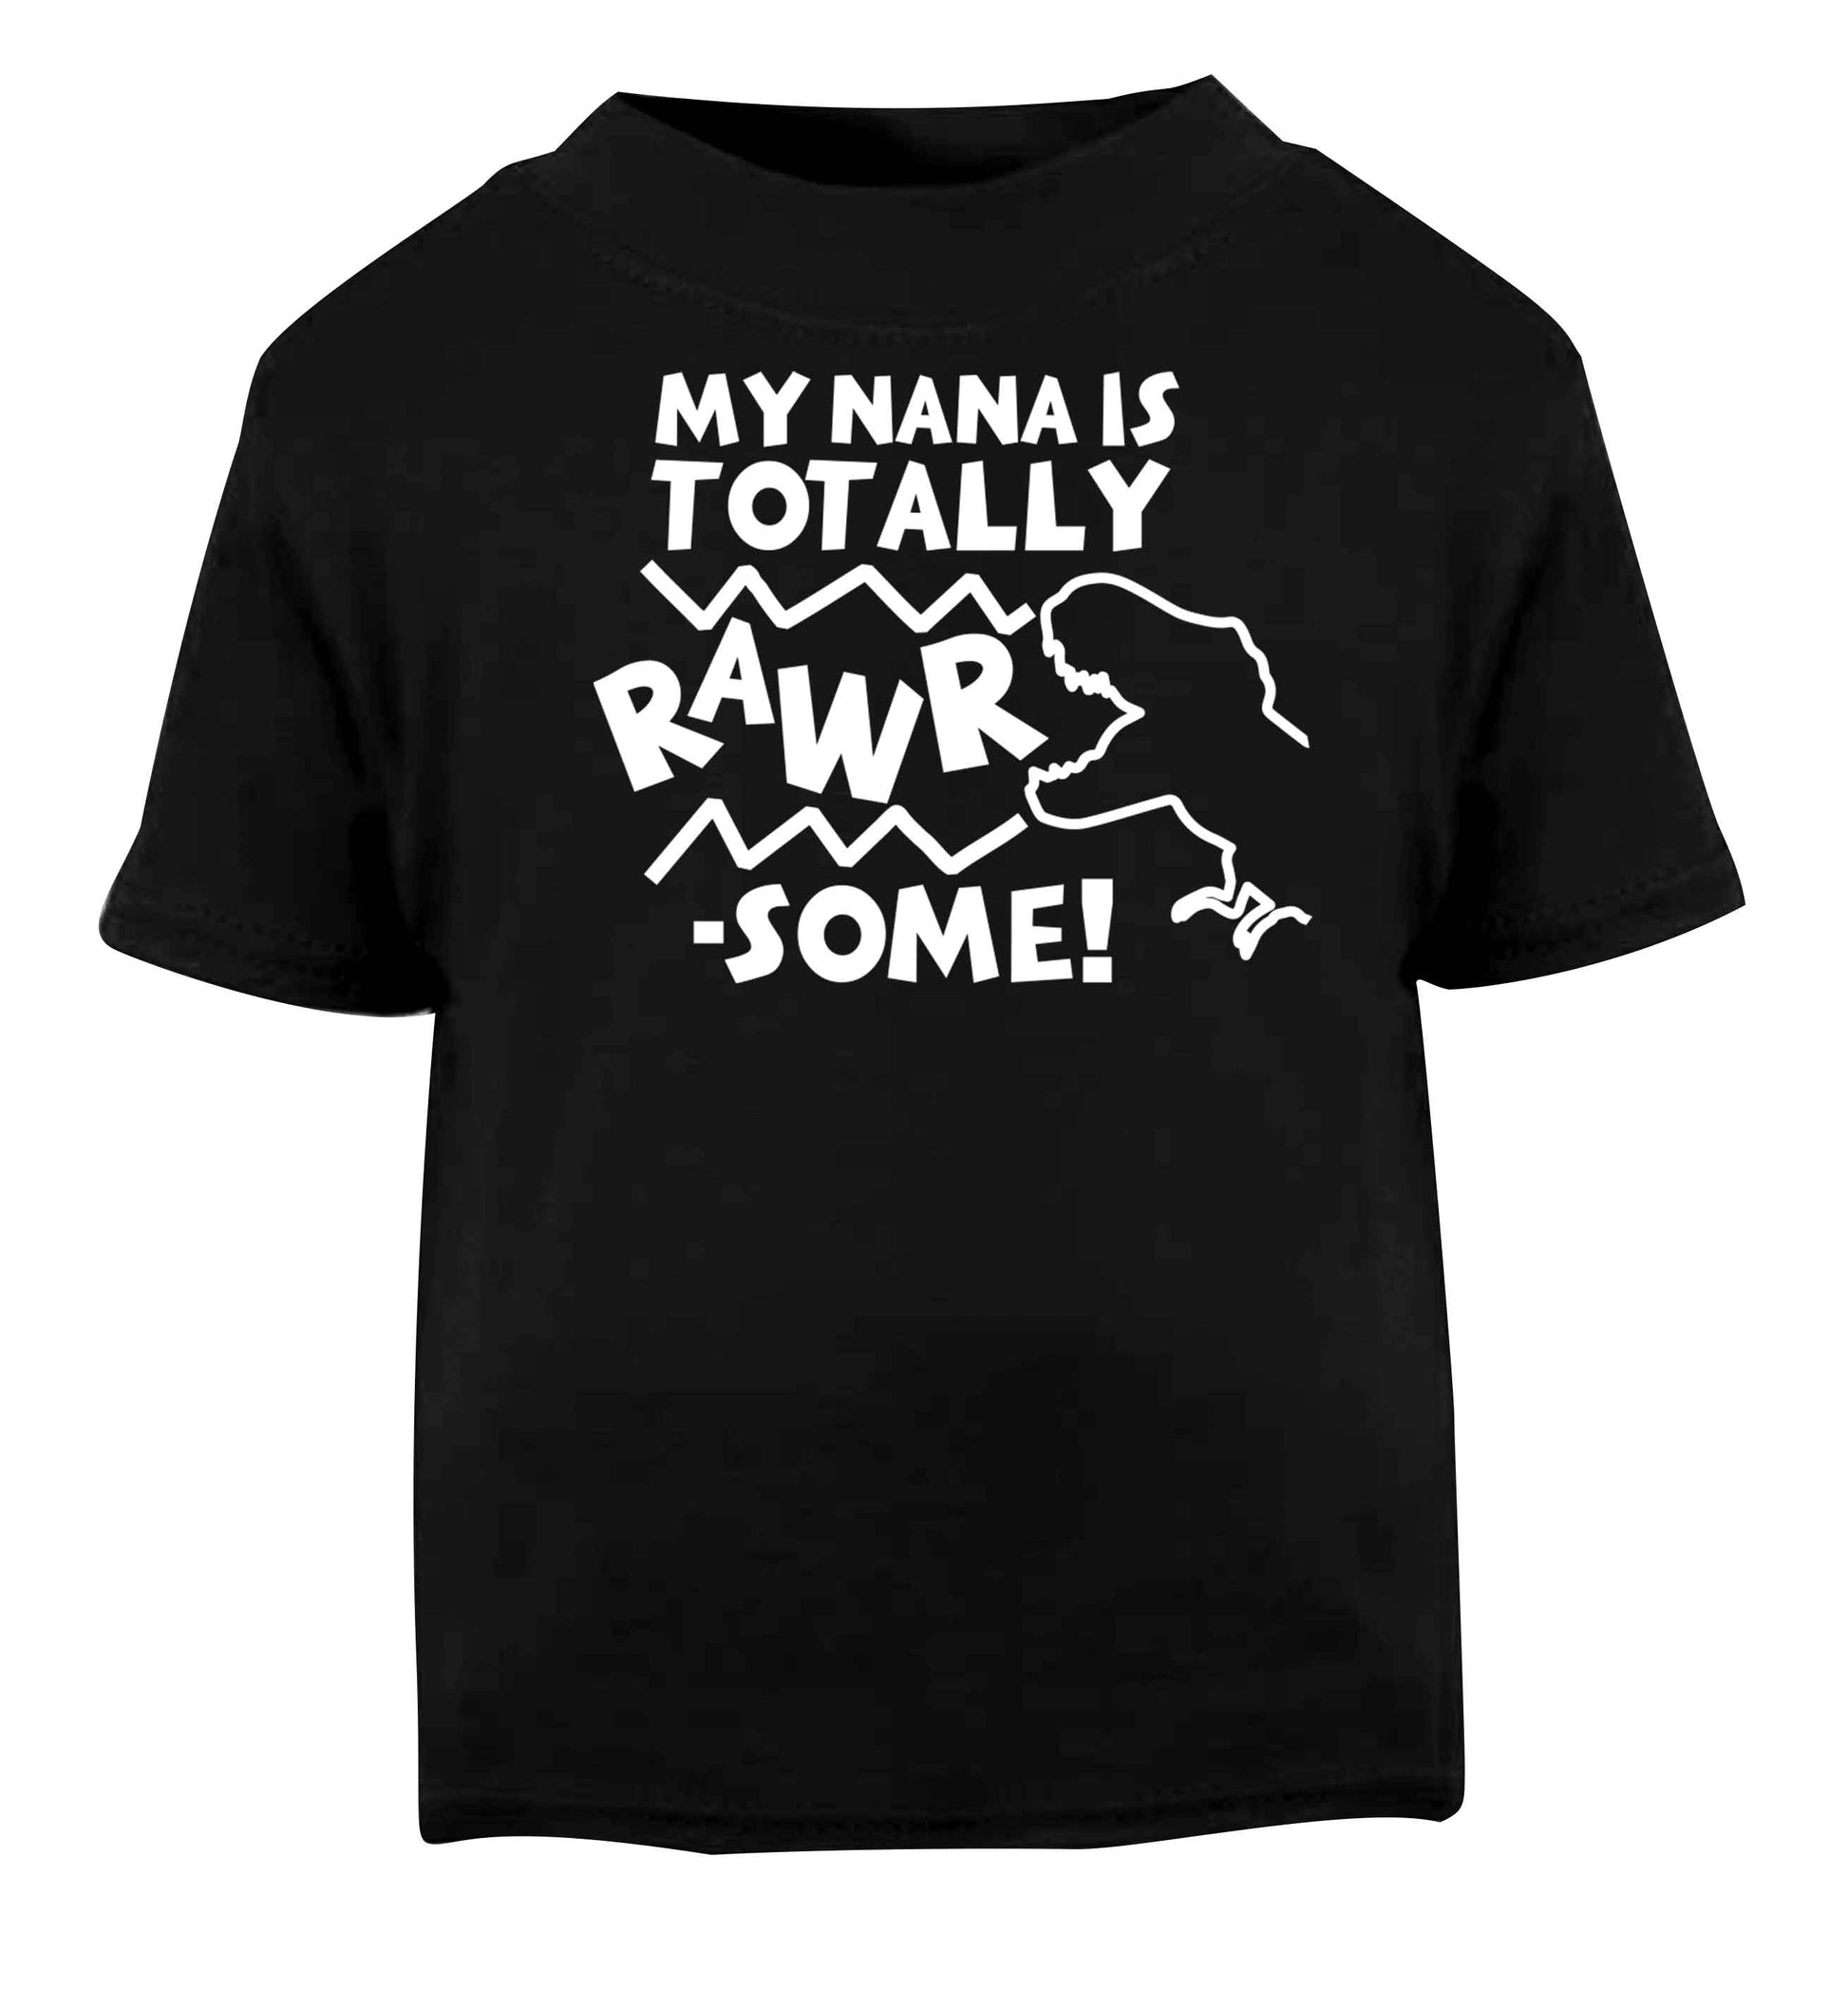 My nana is totally rawrsome Black baby toddler Tshirt 2 years